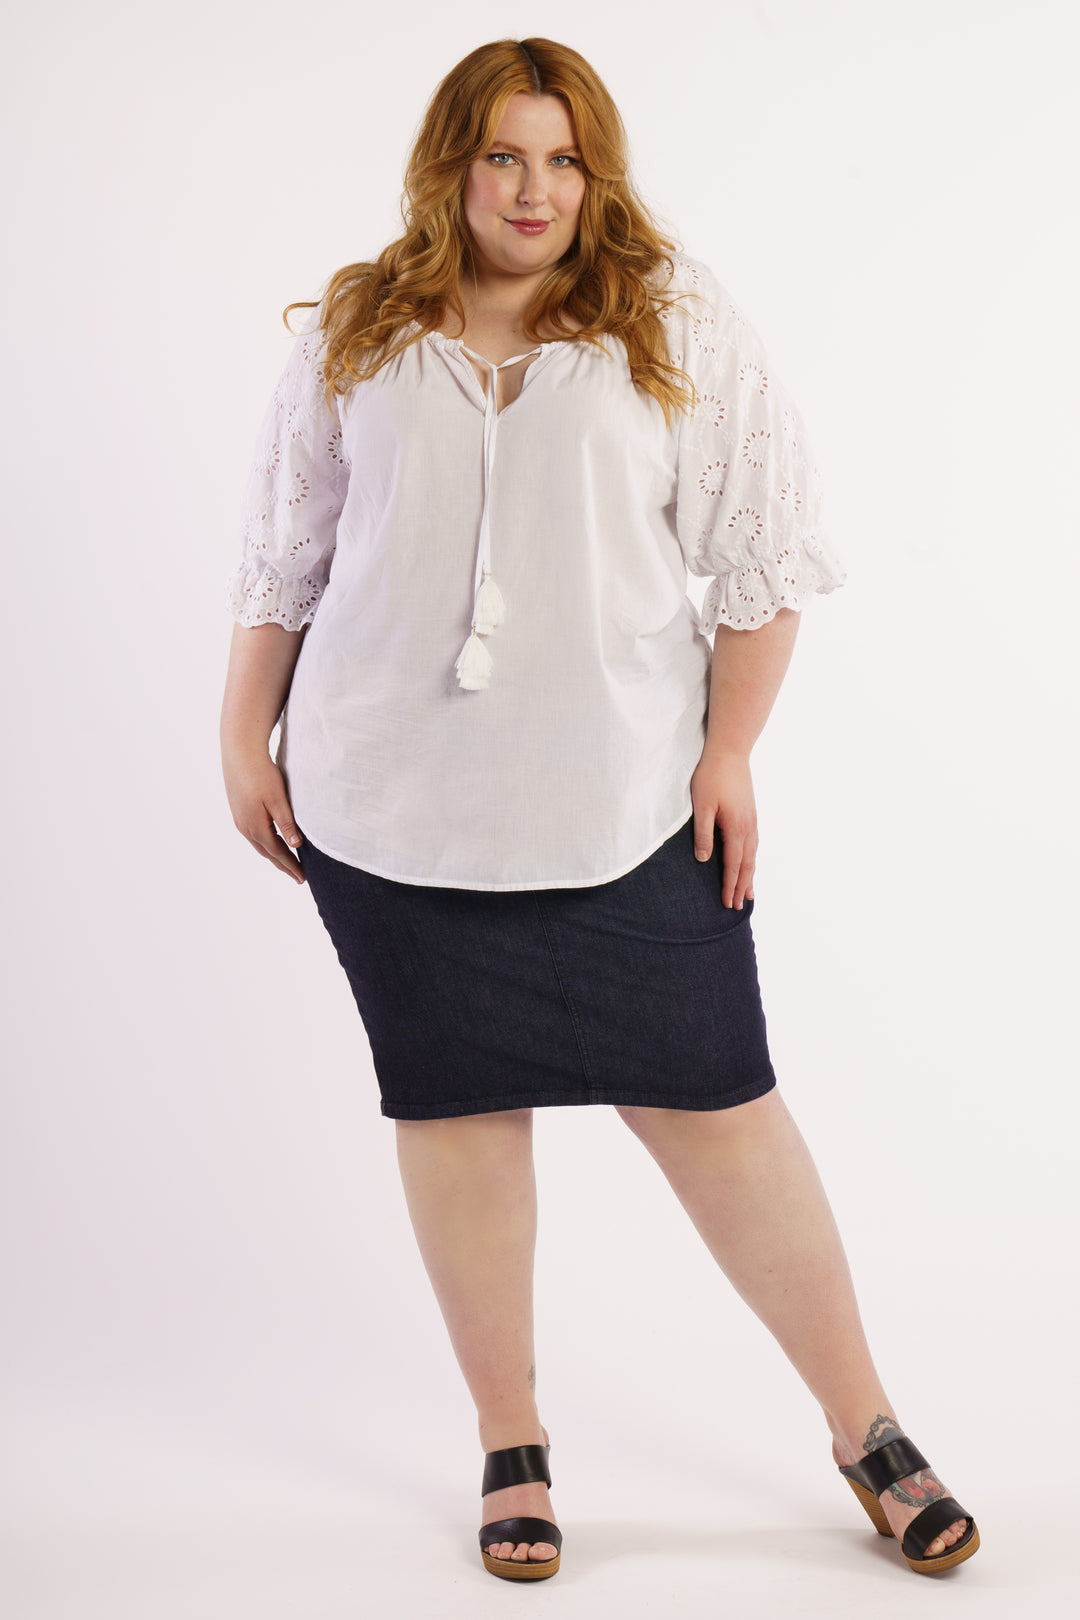 Summer Breeze Broidery Blouse - White - STOCK AVAILABLE - XS (12/14) & S (14/16)